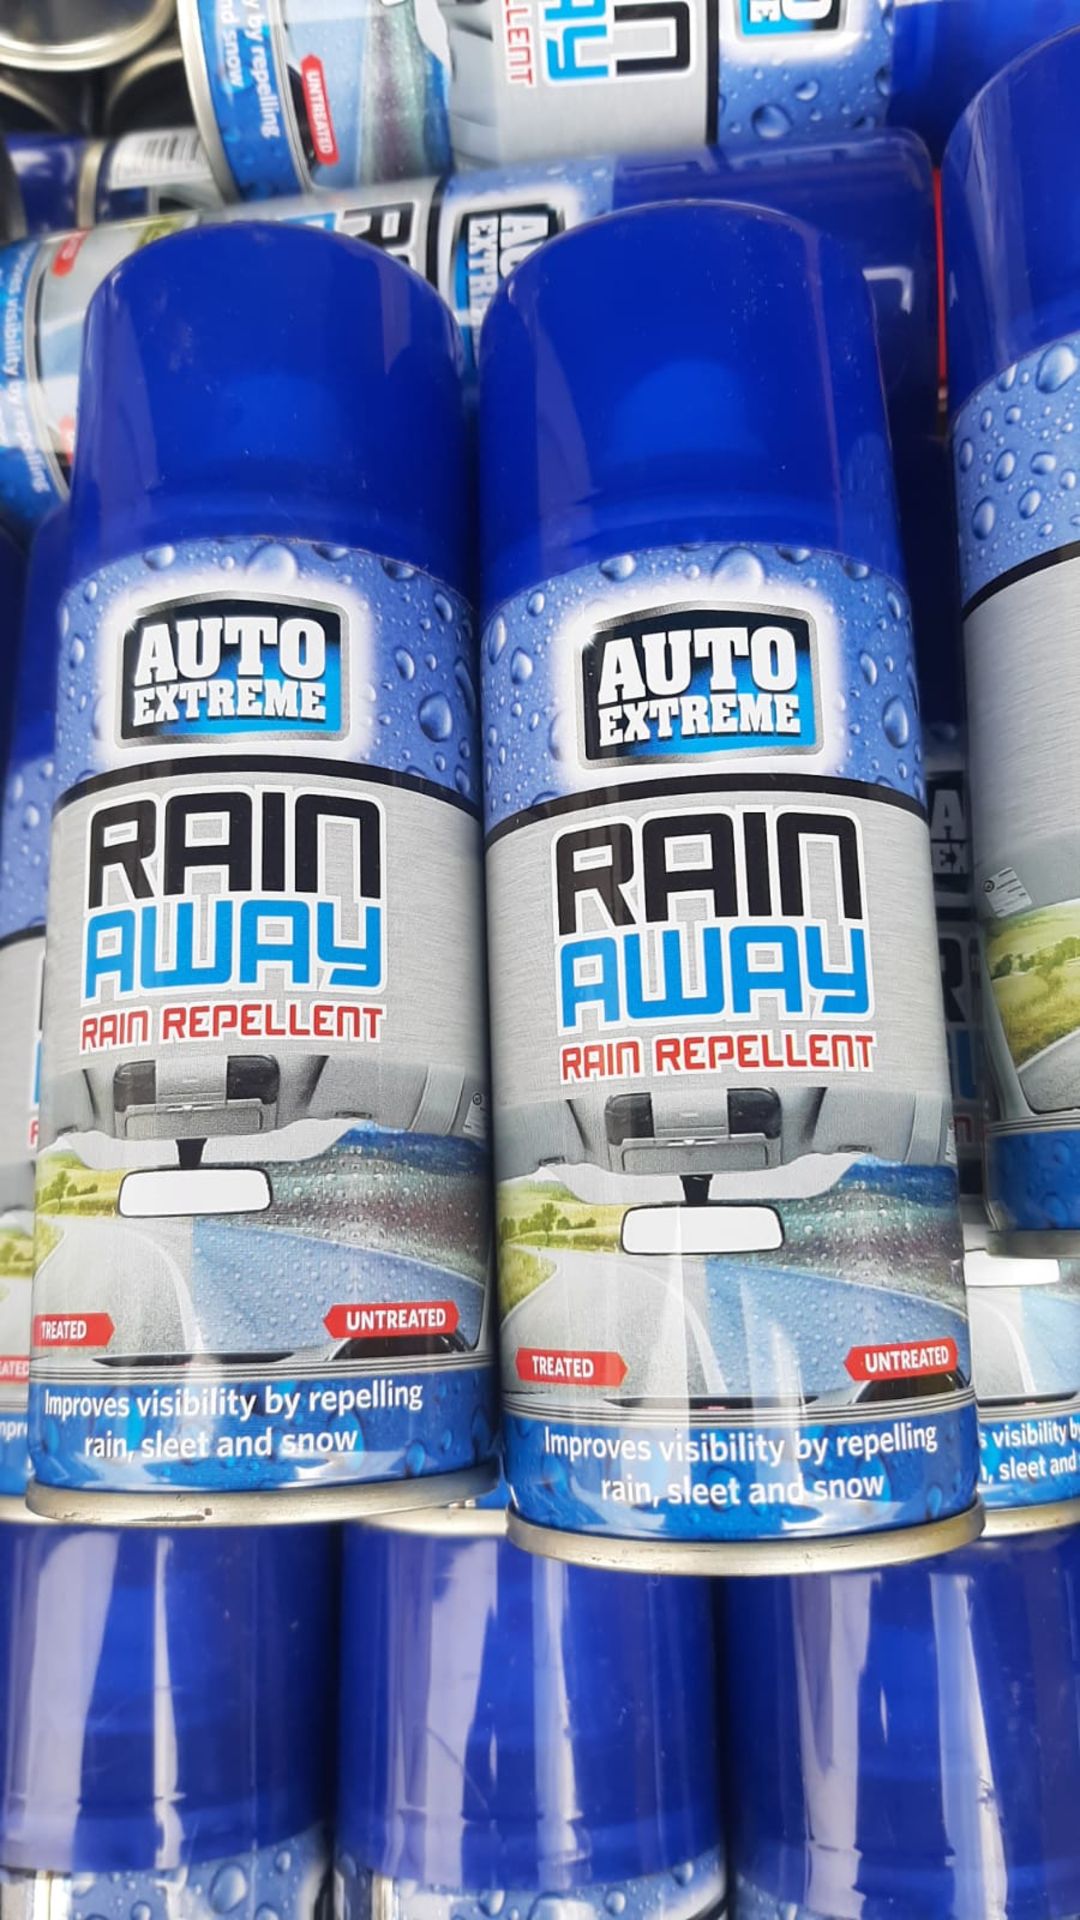 Rain Away auto extreme 200ml cans x 20 all new and sealed *NO VAT*